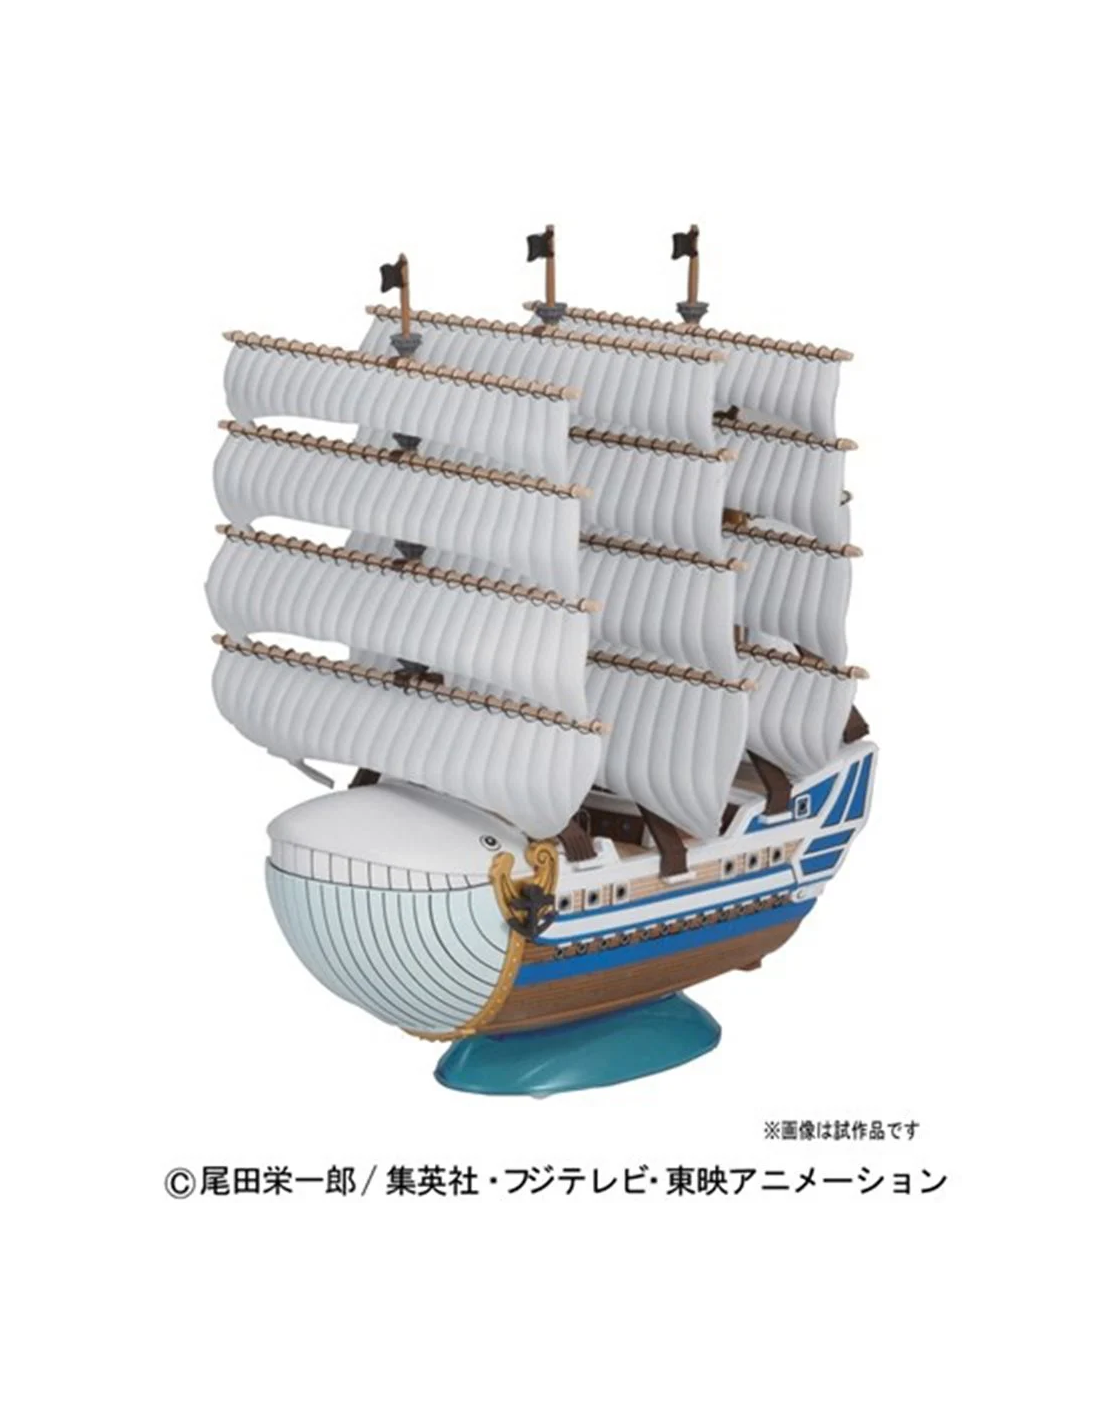 ONE PIECE GRANDSHIP COLLECTION - Moby Dick - MAQUETTE BATEAU